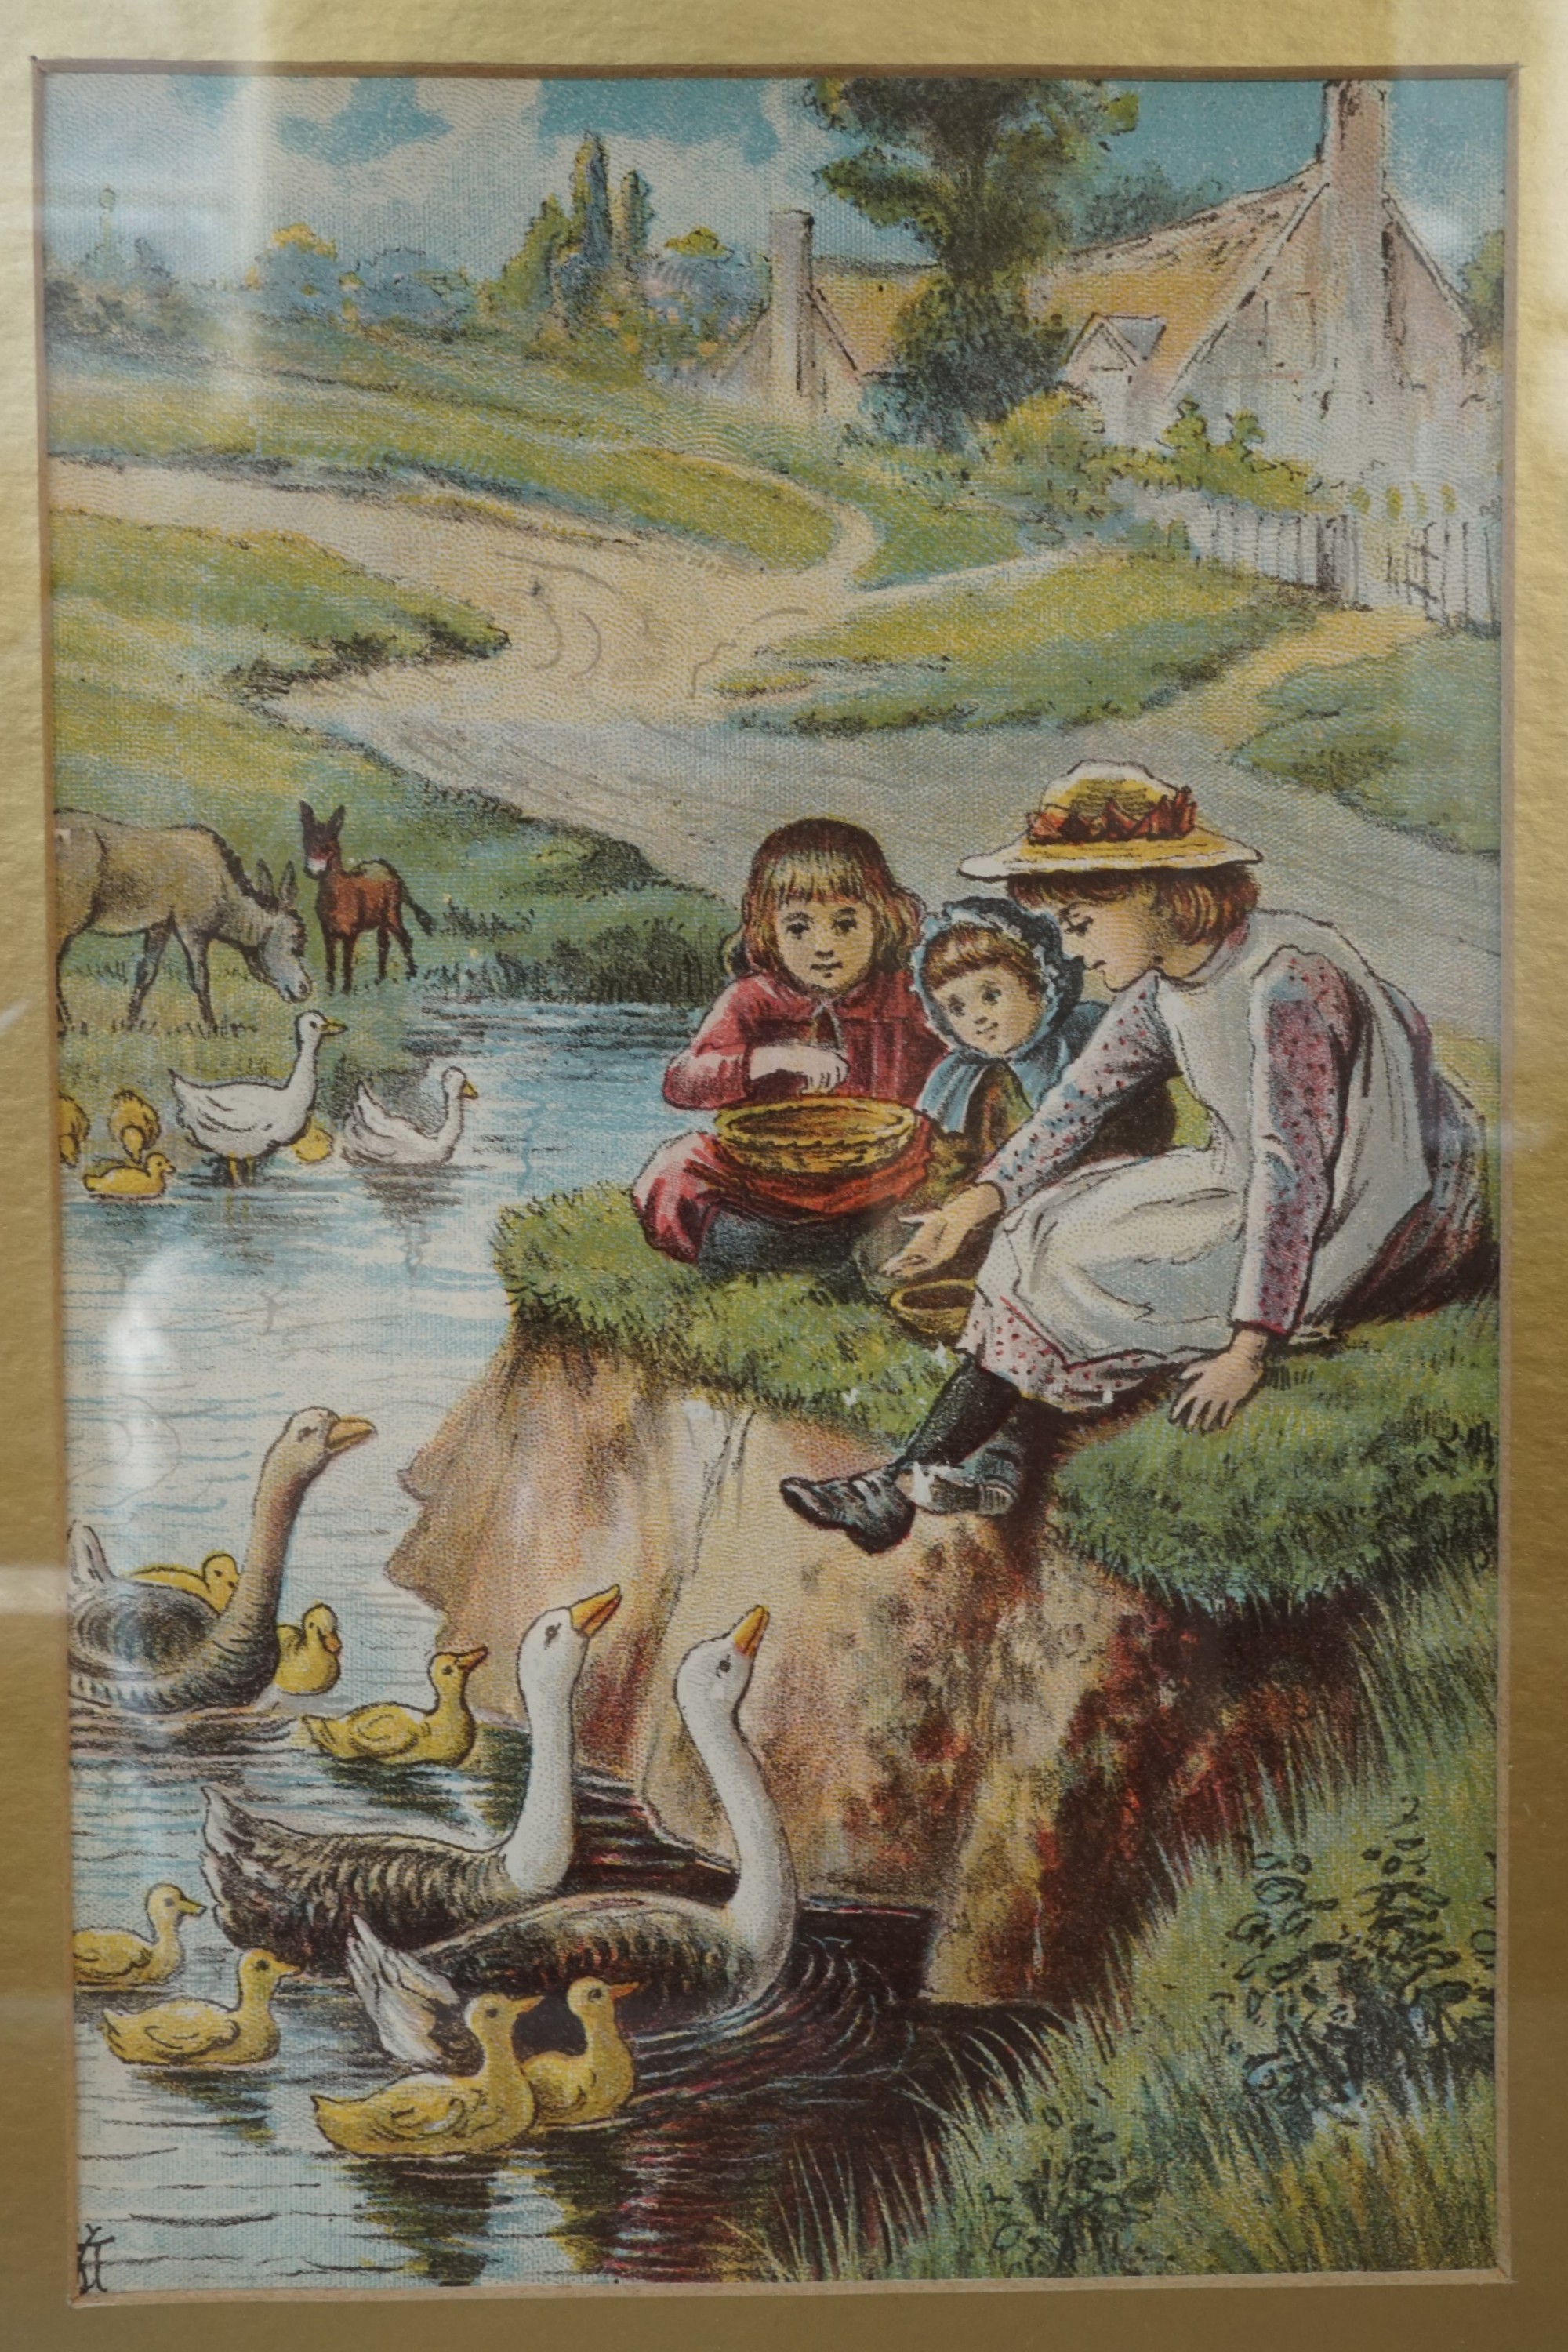 A late 19th Century lithograph depicting three young children feeding geese from a river bank, in